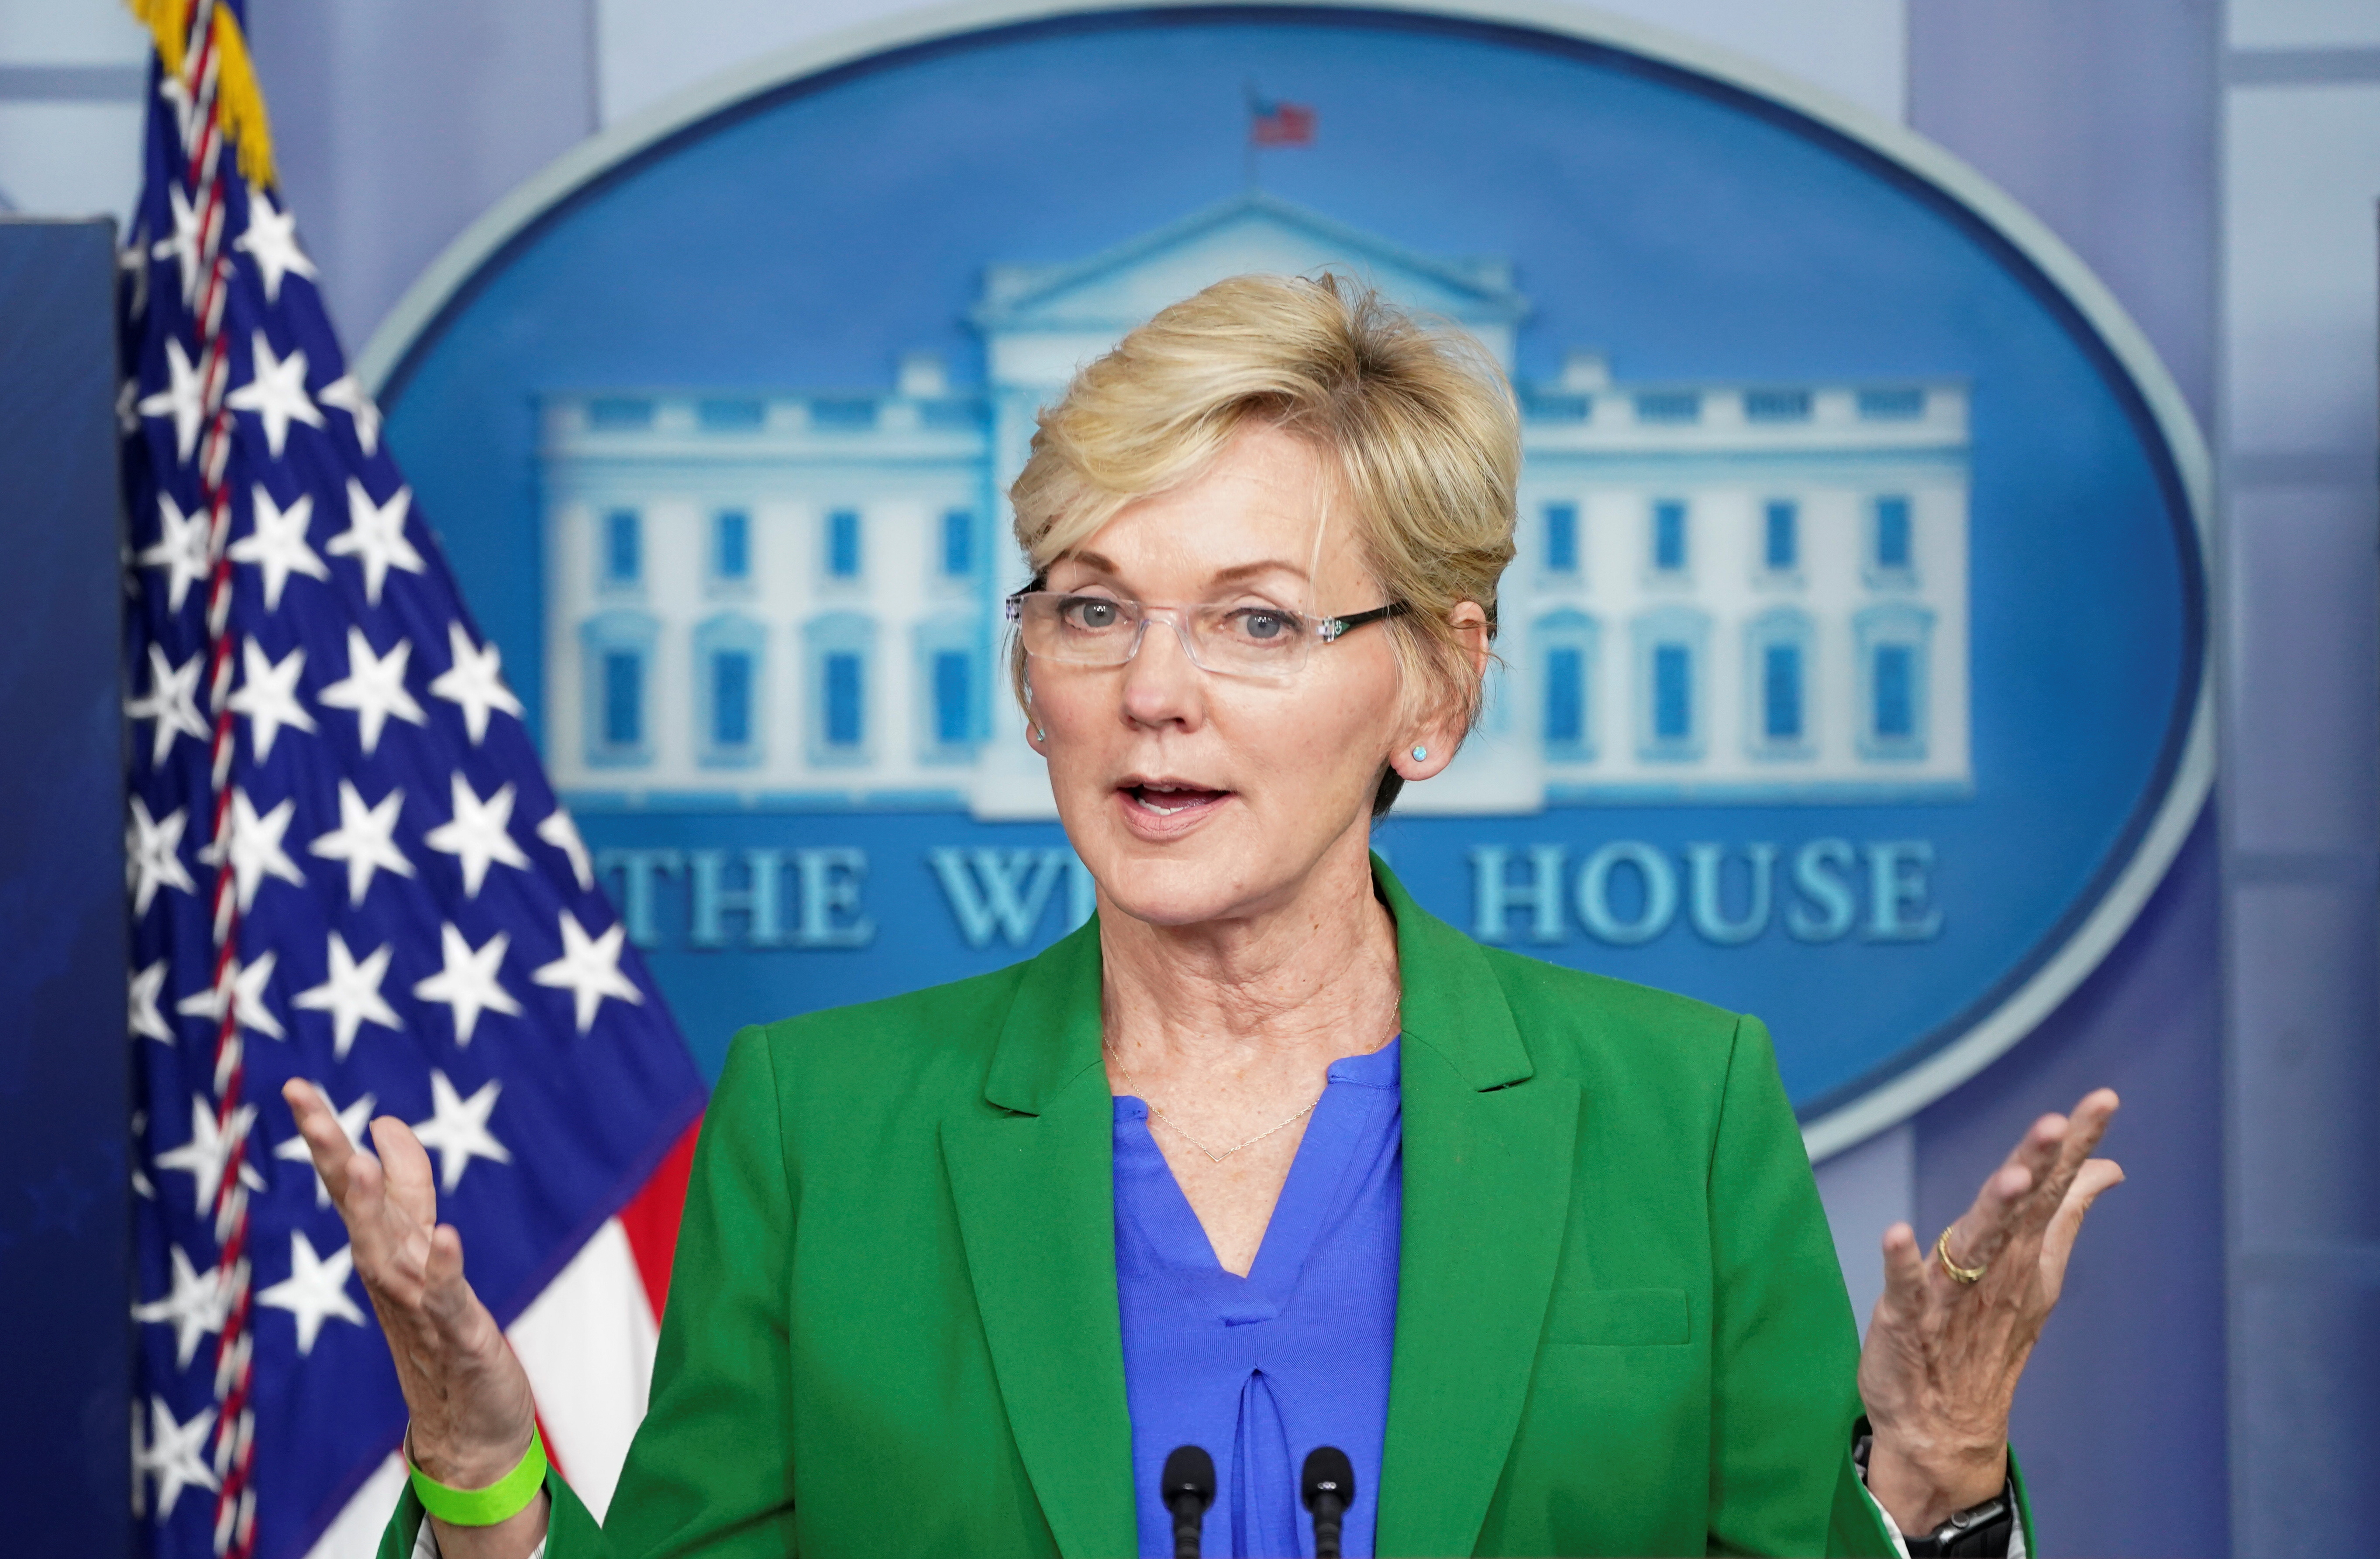 Energy Secretary Granholm speaks at a press briefing at the White House in Washington